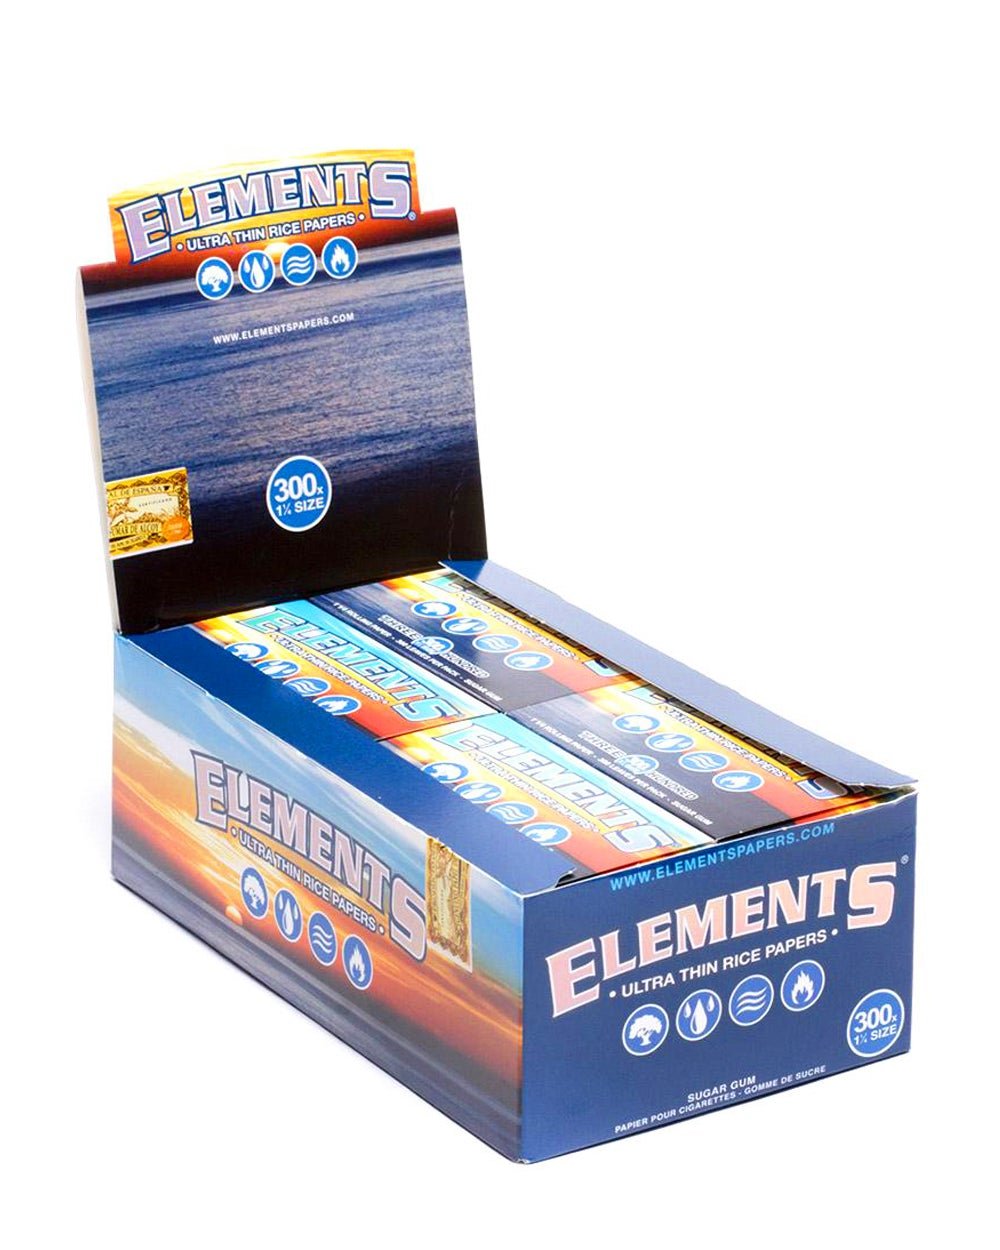 ELEMENTS | 'Retail Display' 300x 1 1/4 Size Ultra Thin Rolling Papers | 83mm - Rice Paper - 20 Count - 1